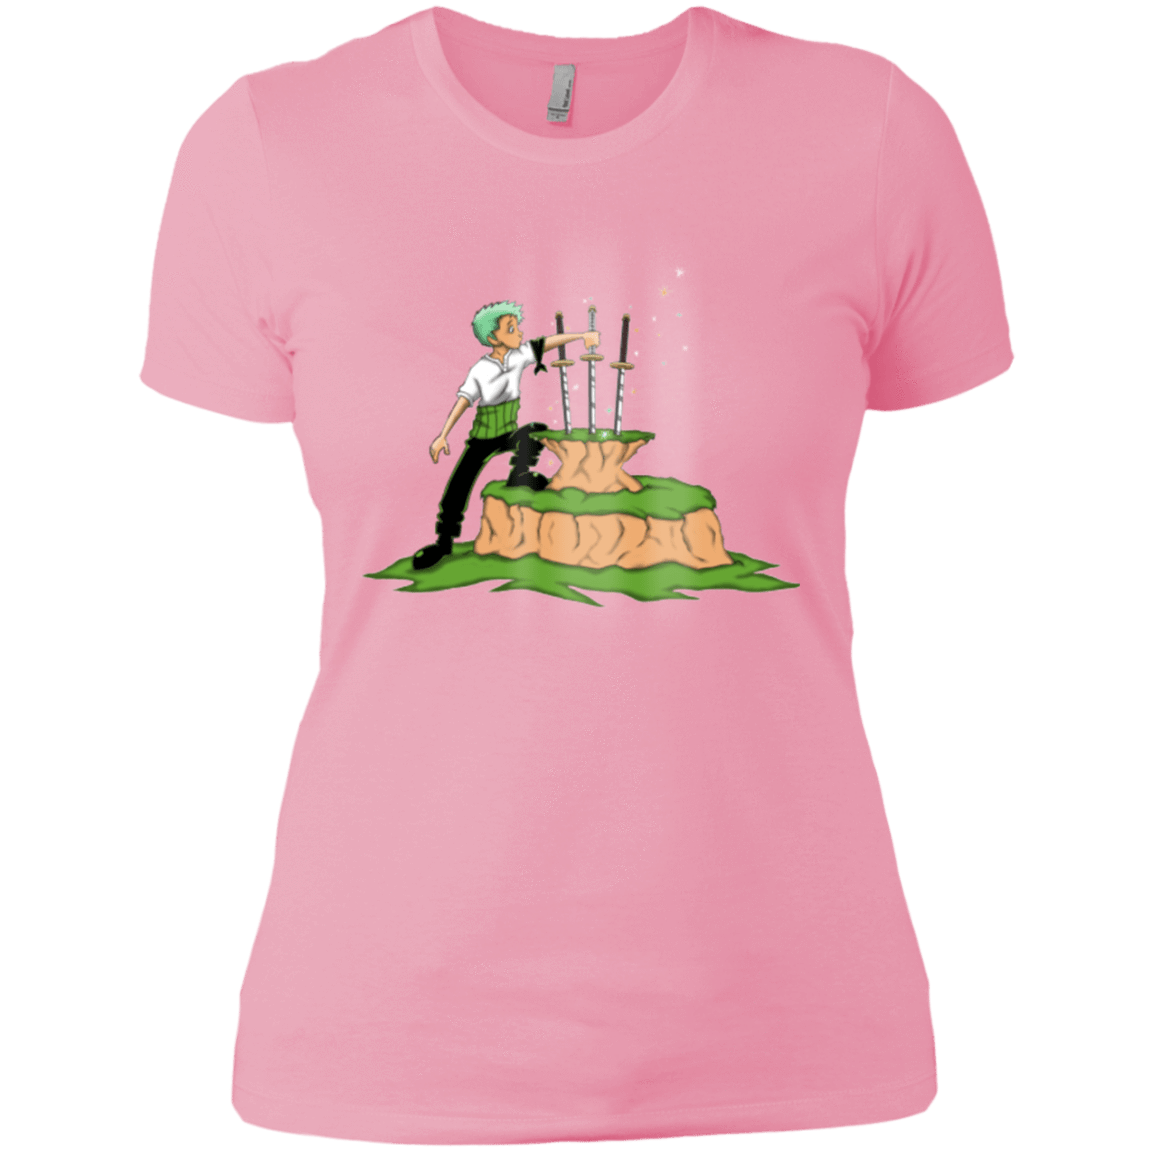 T-Shirts Light Pink / X-Small 3 Swords in the Stone Women's Premium T-Shirt